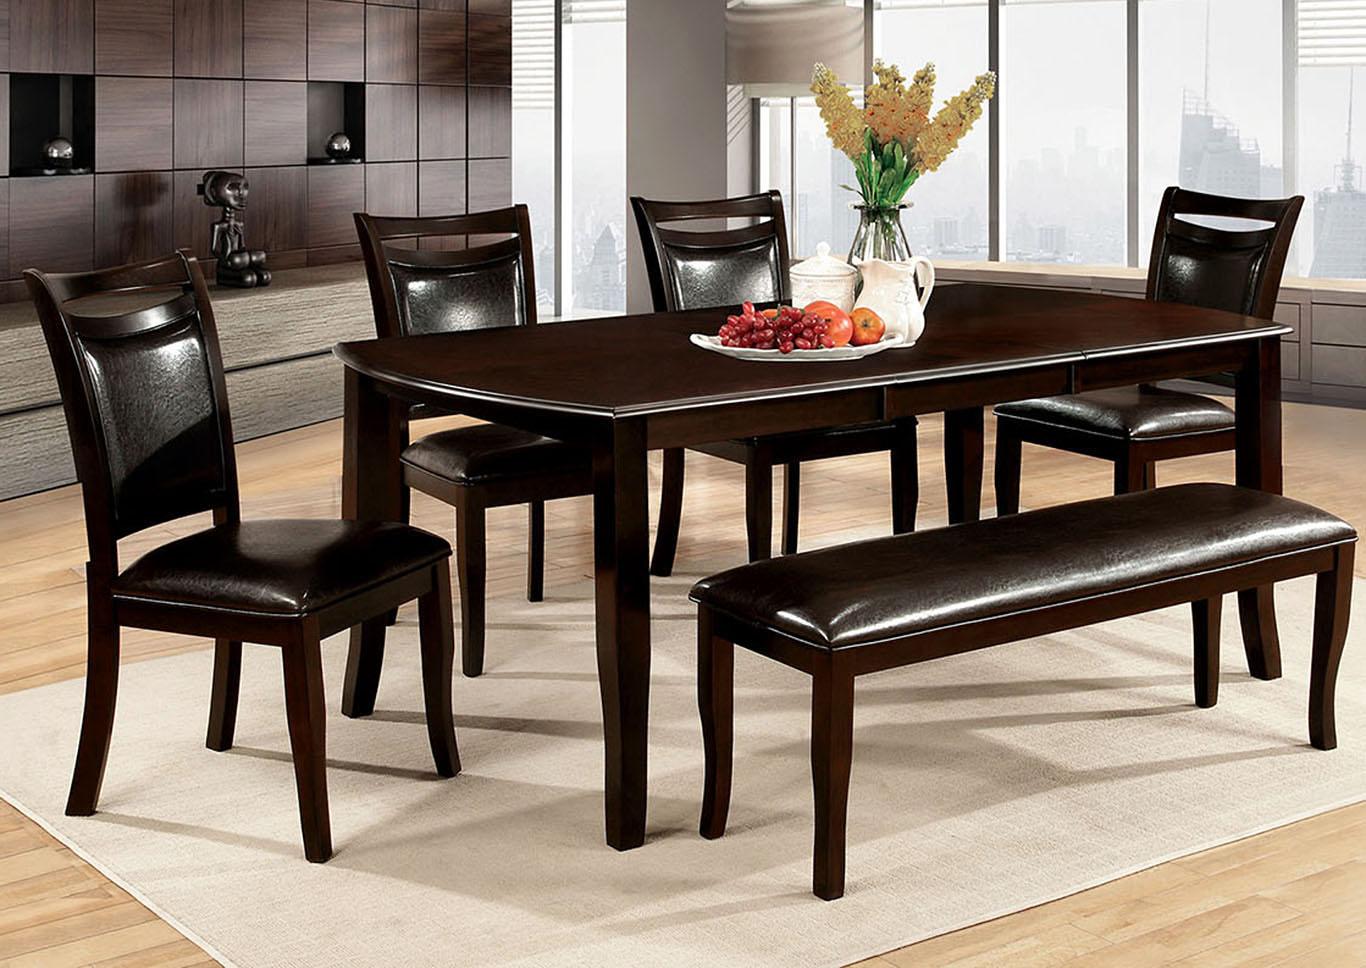 Transitional Dining Table Set WOODSIDE CM3024T-6PC CM3024T-6PC in Dark Cherry, Espresso Leatherette